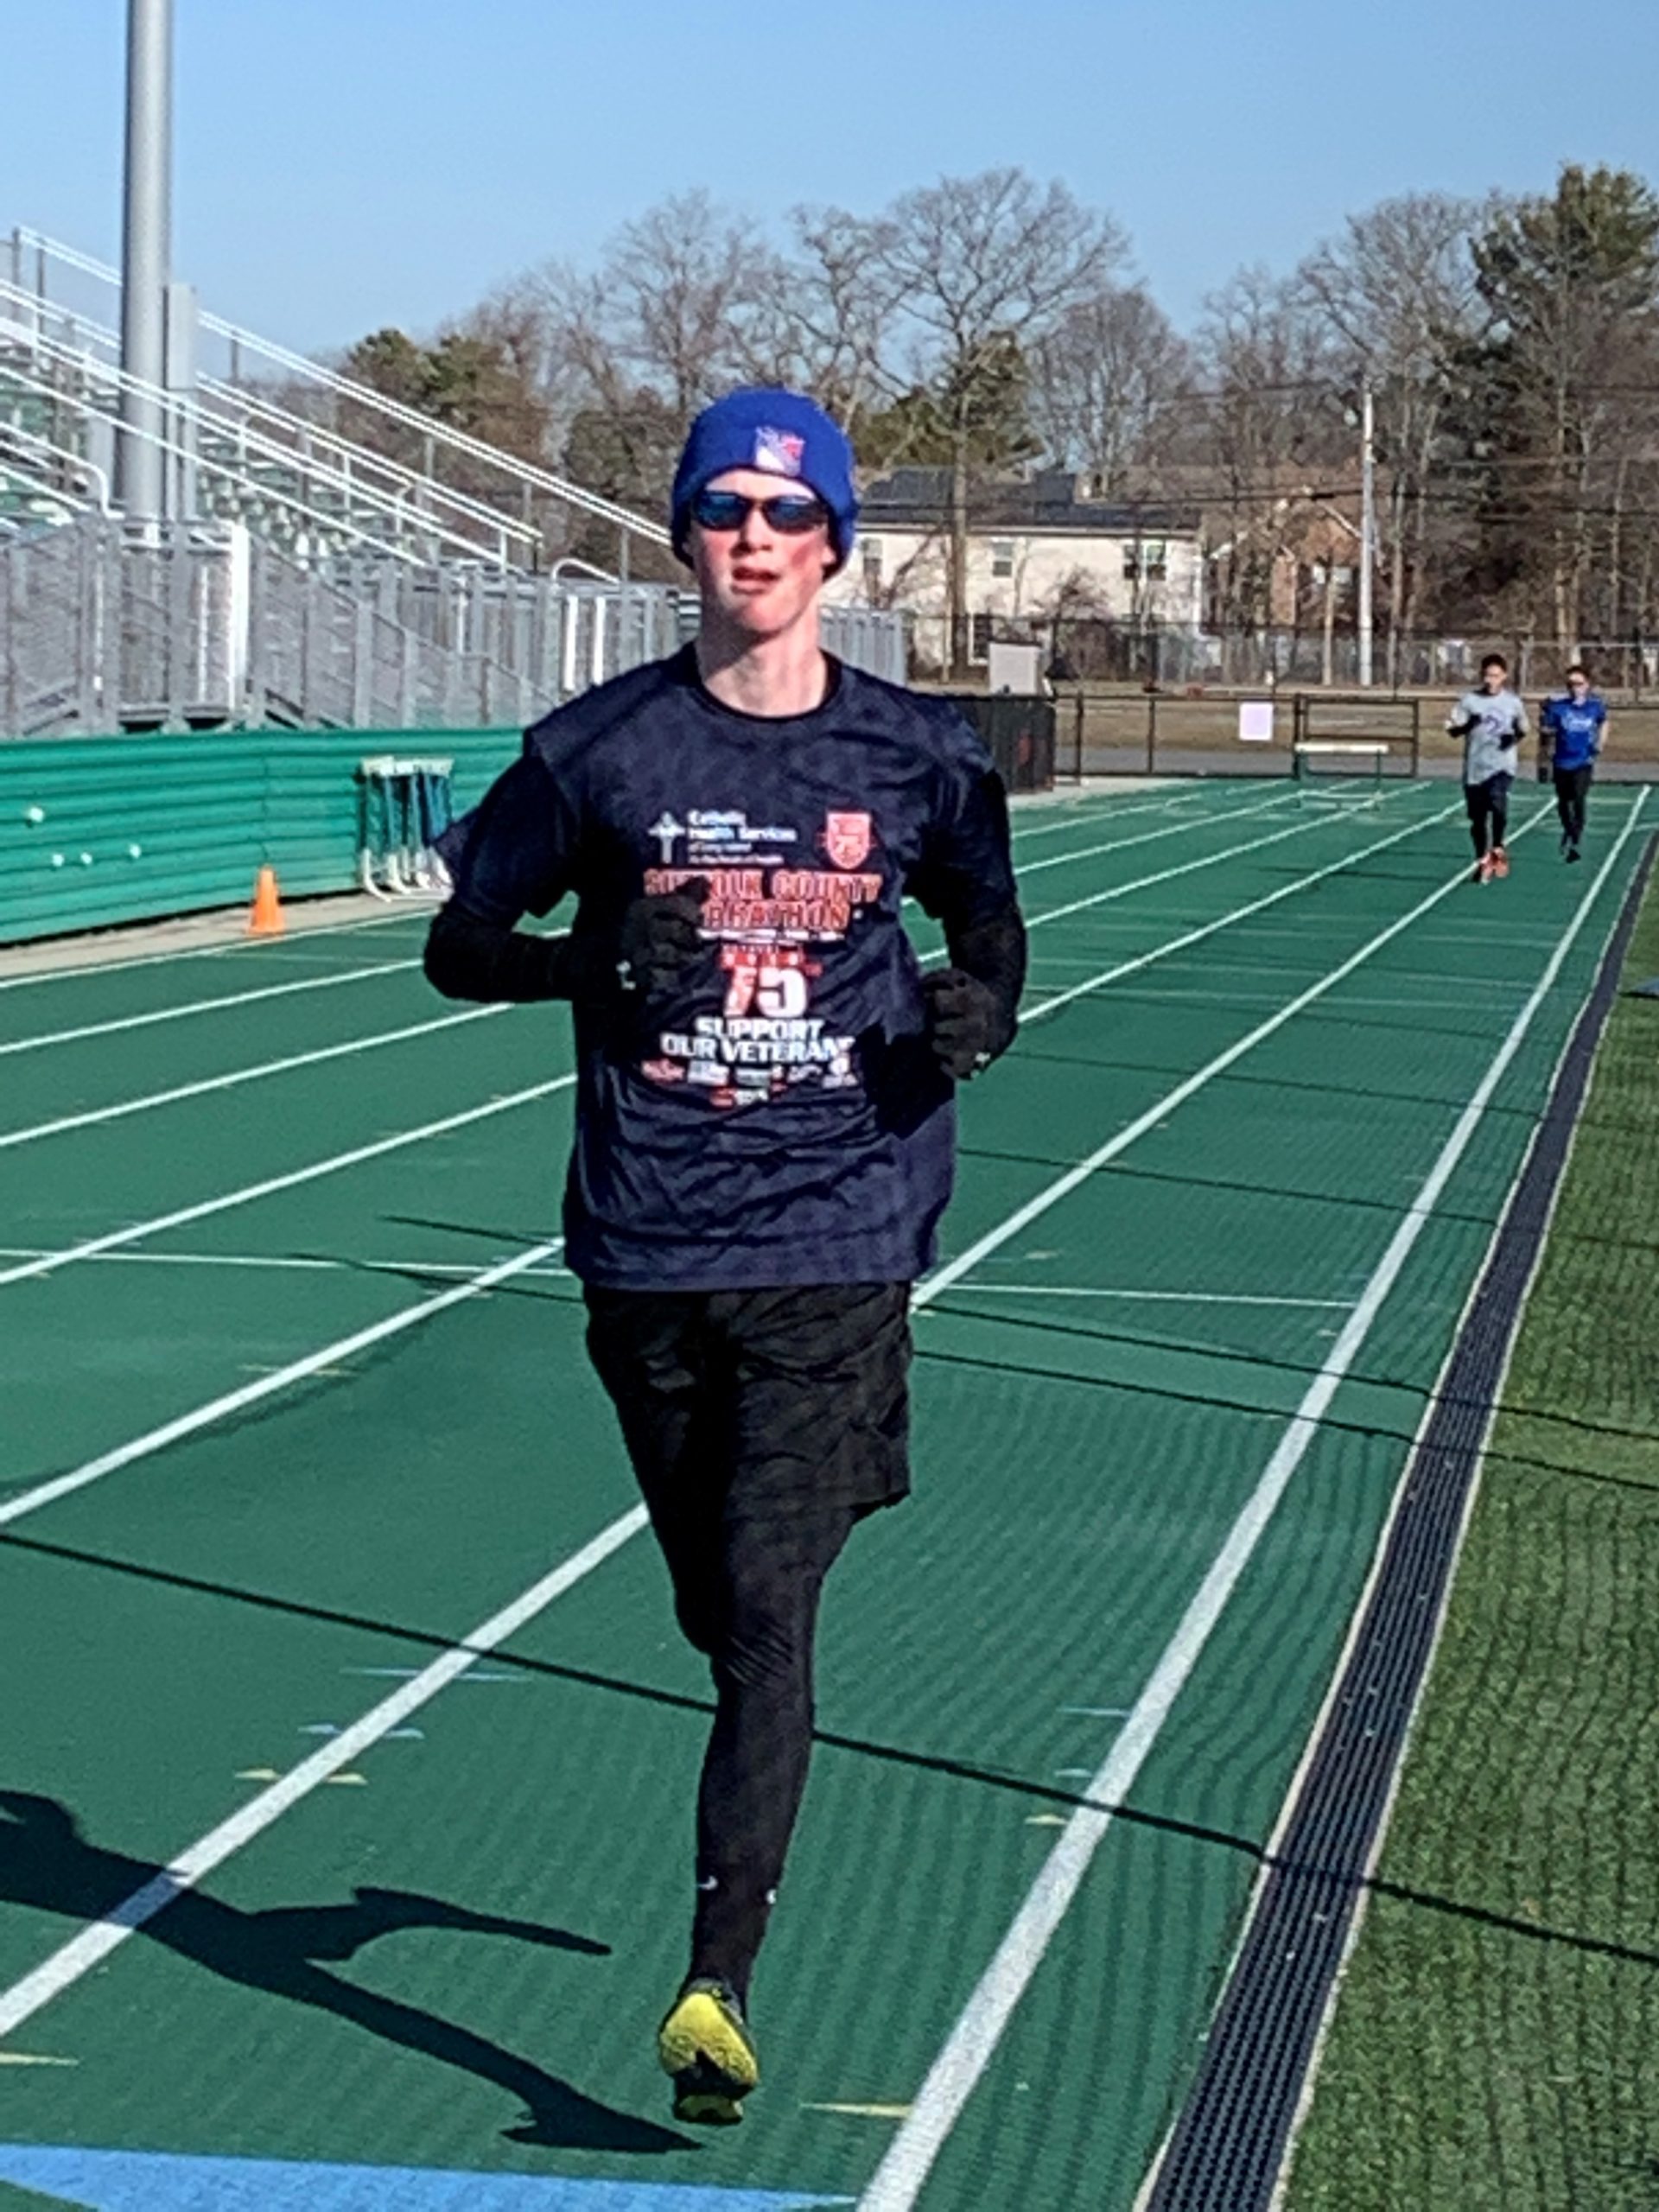 Male athlete wearing long sleeves and blue hat running on a track